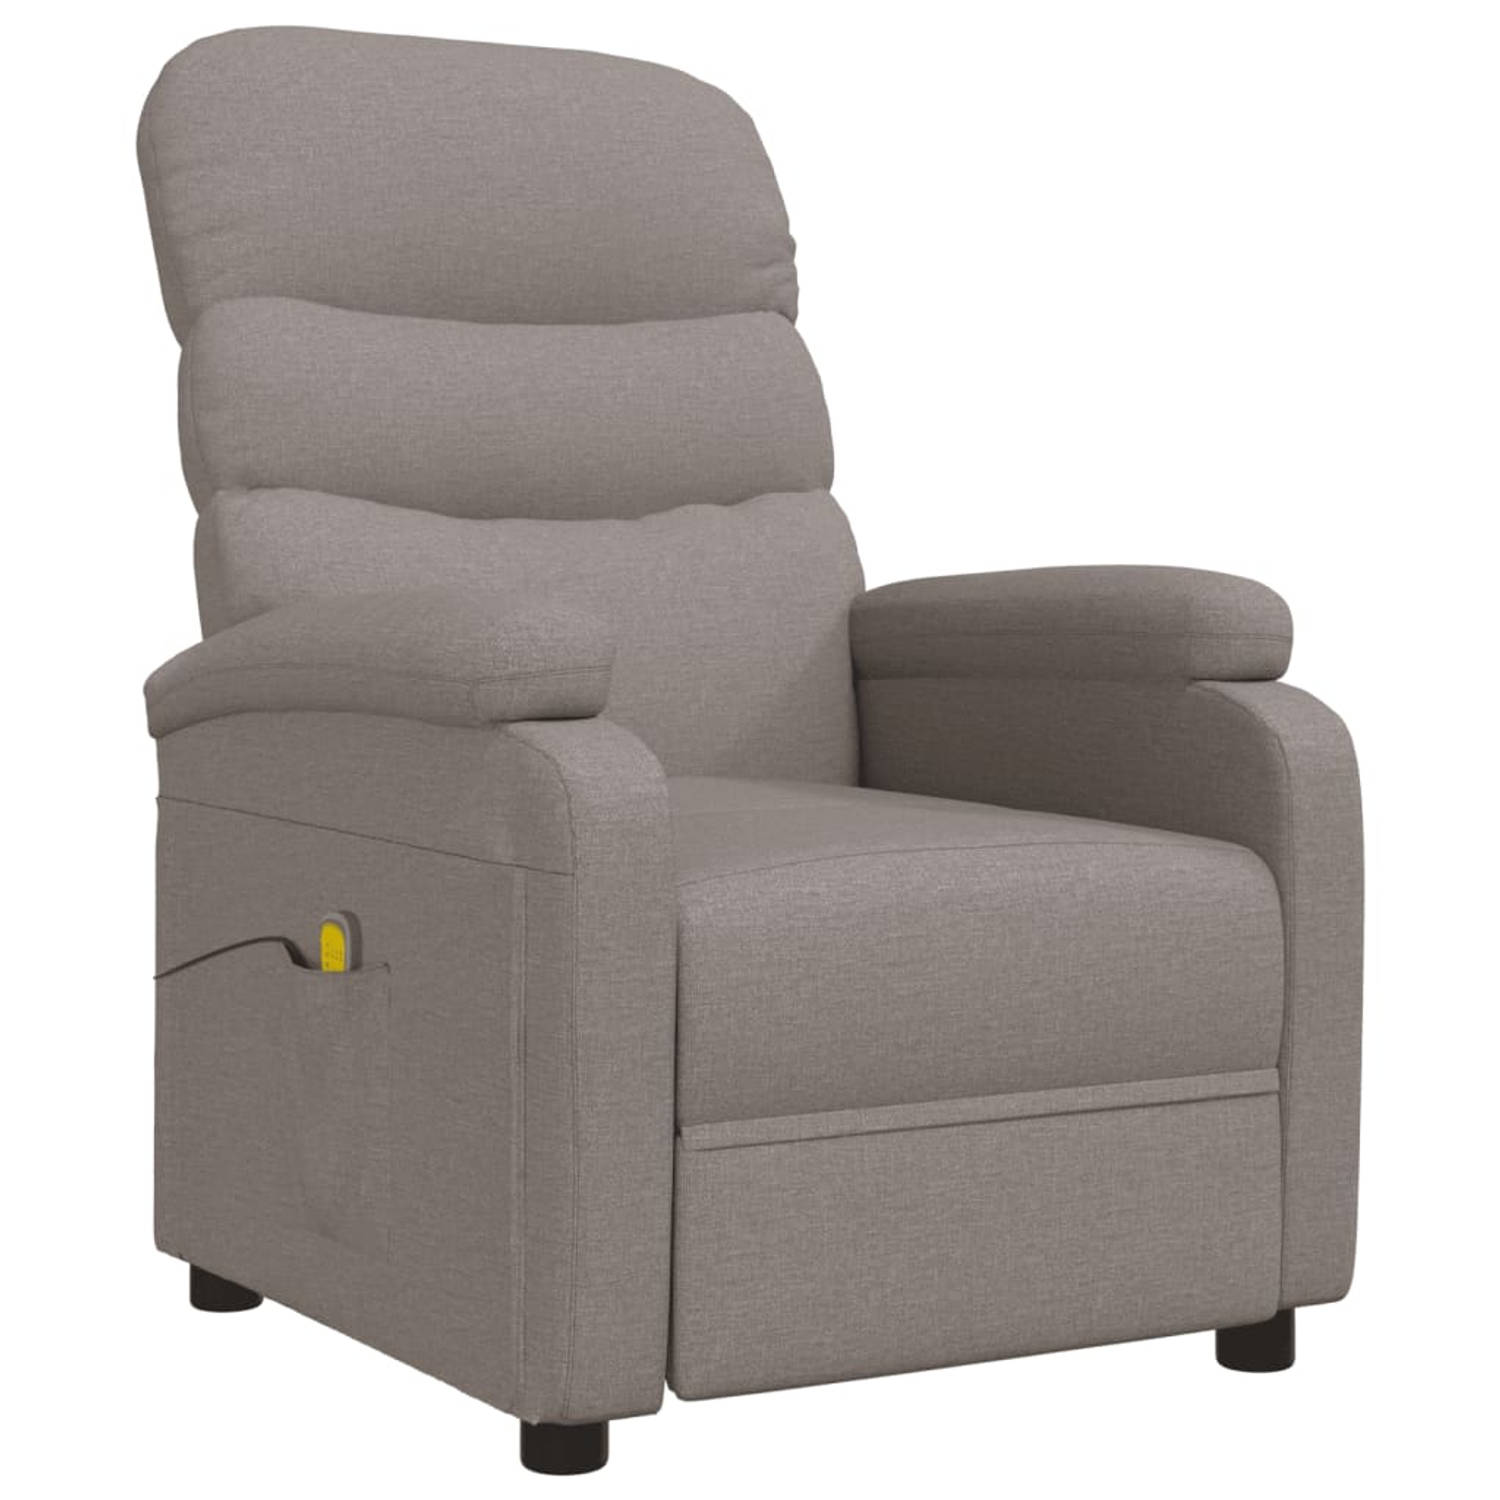 The Living Store Massagestoel stof taupe - Fauteuil